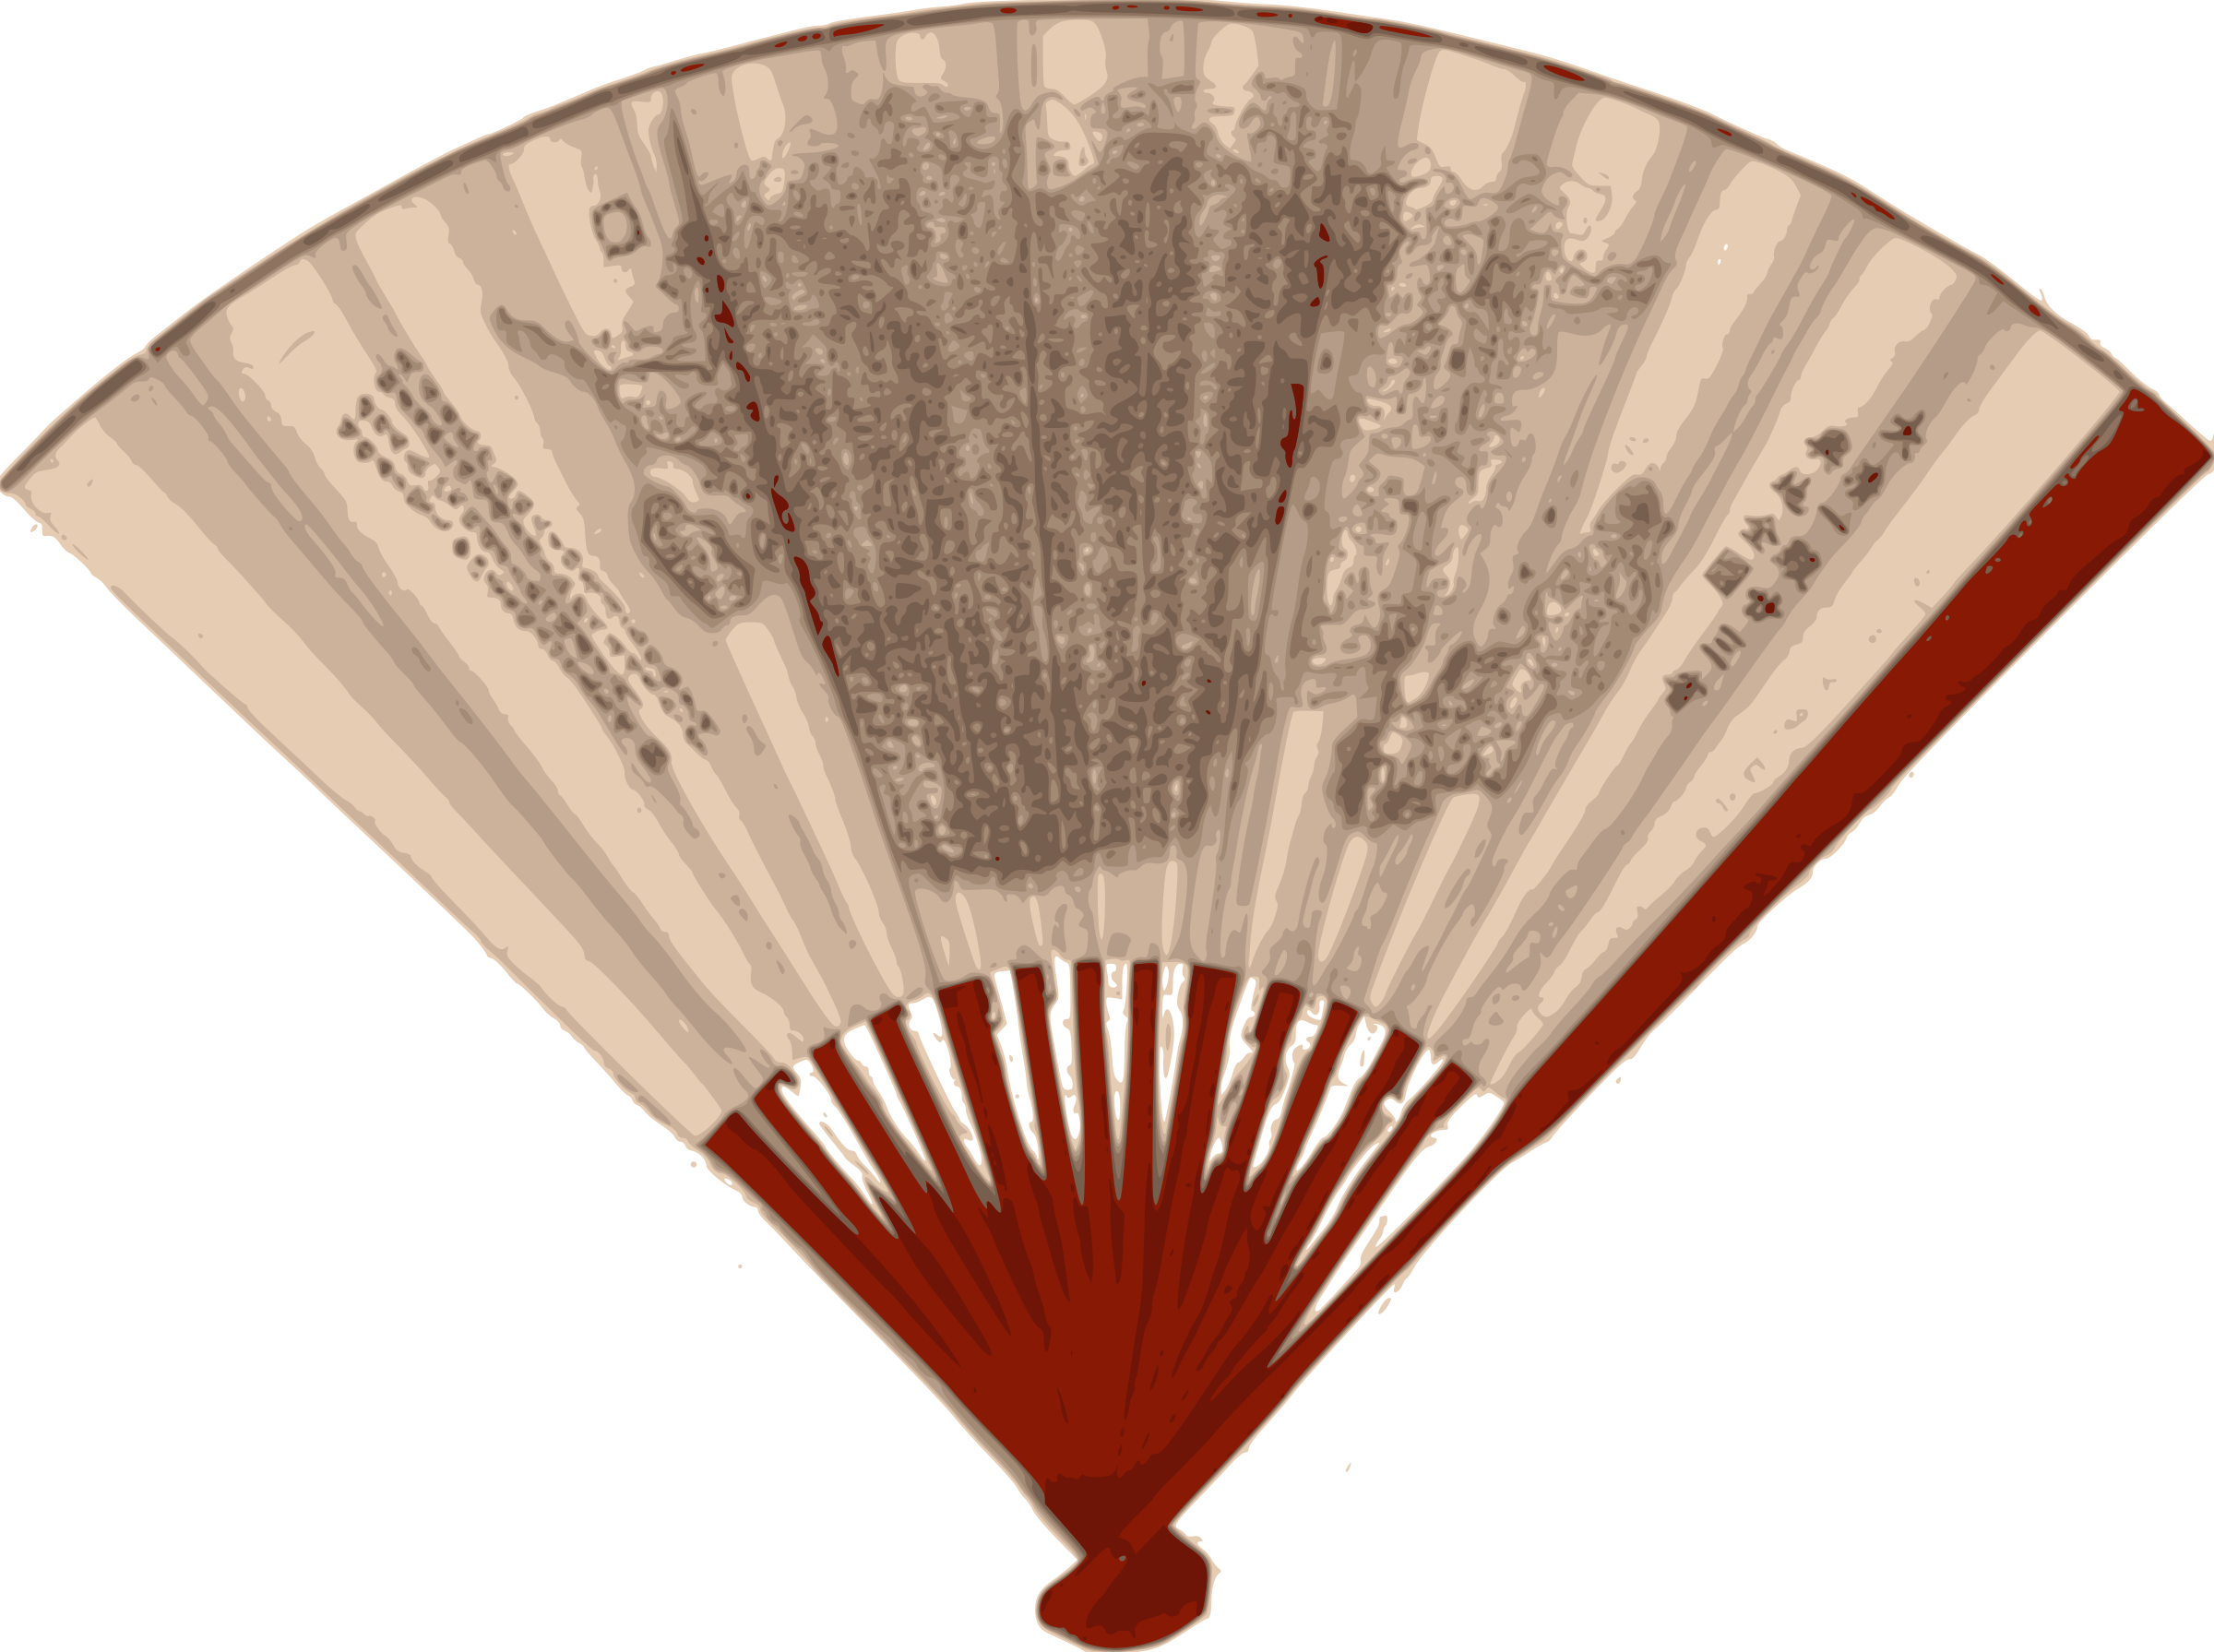 https://openclipart.org/image/2400px/svg_to_png/28820/j4p4n-Asian-Fan-with-a-map-1890.png